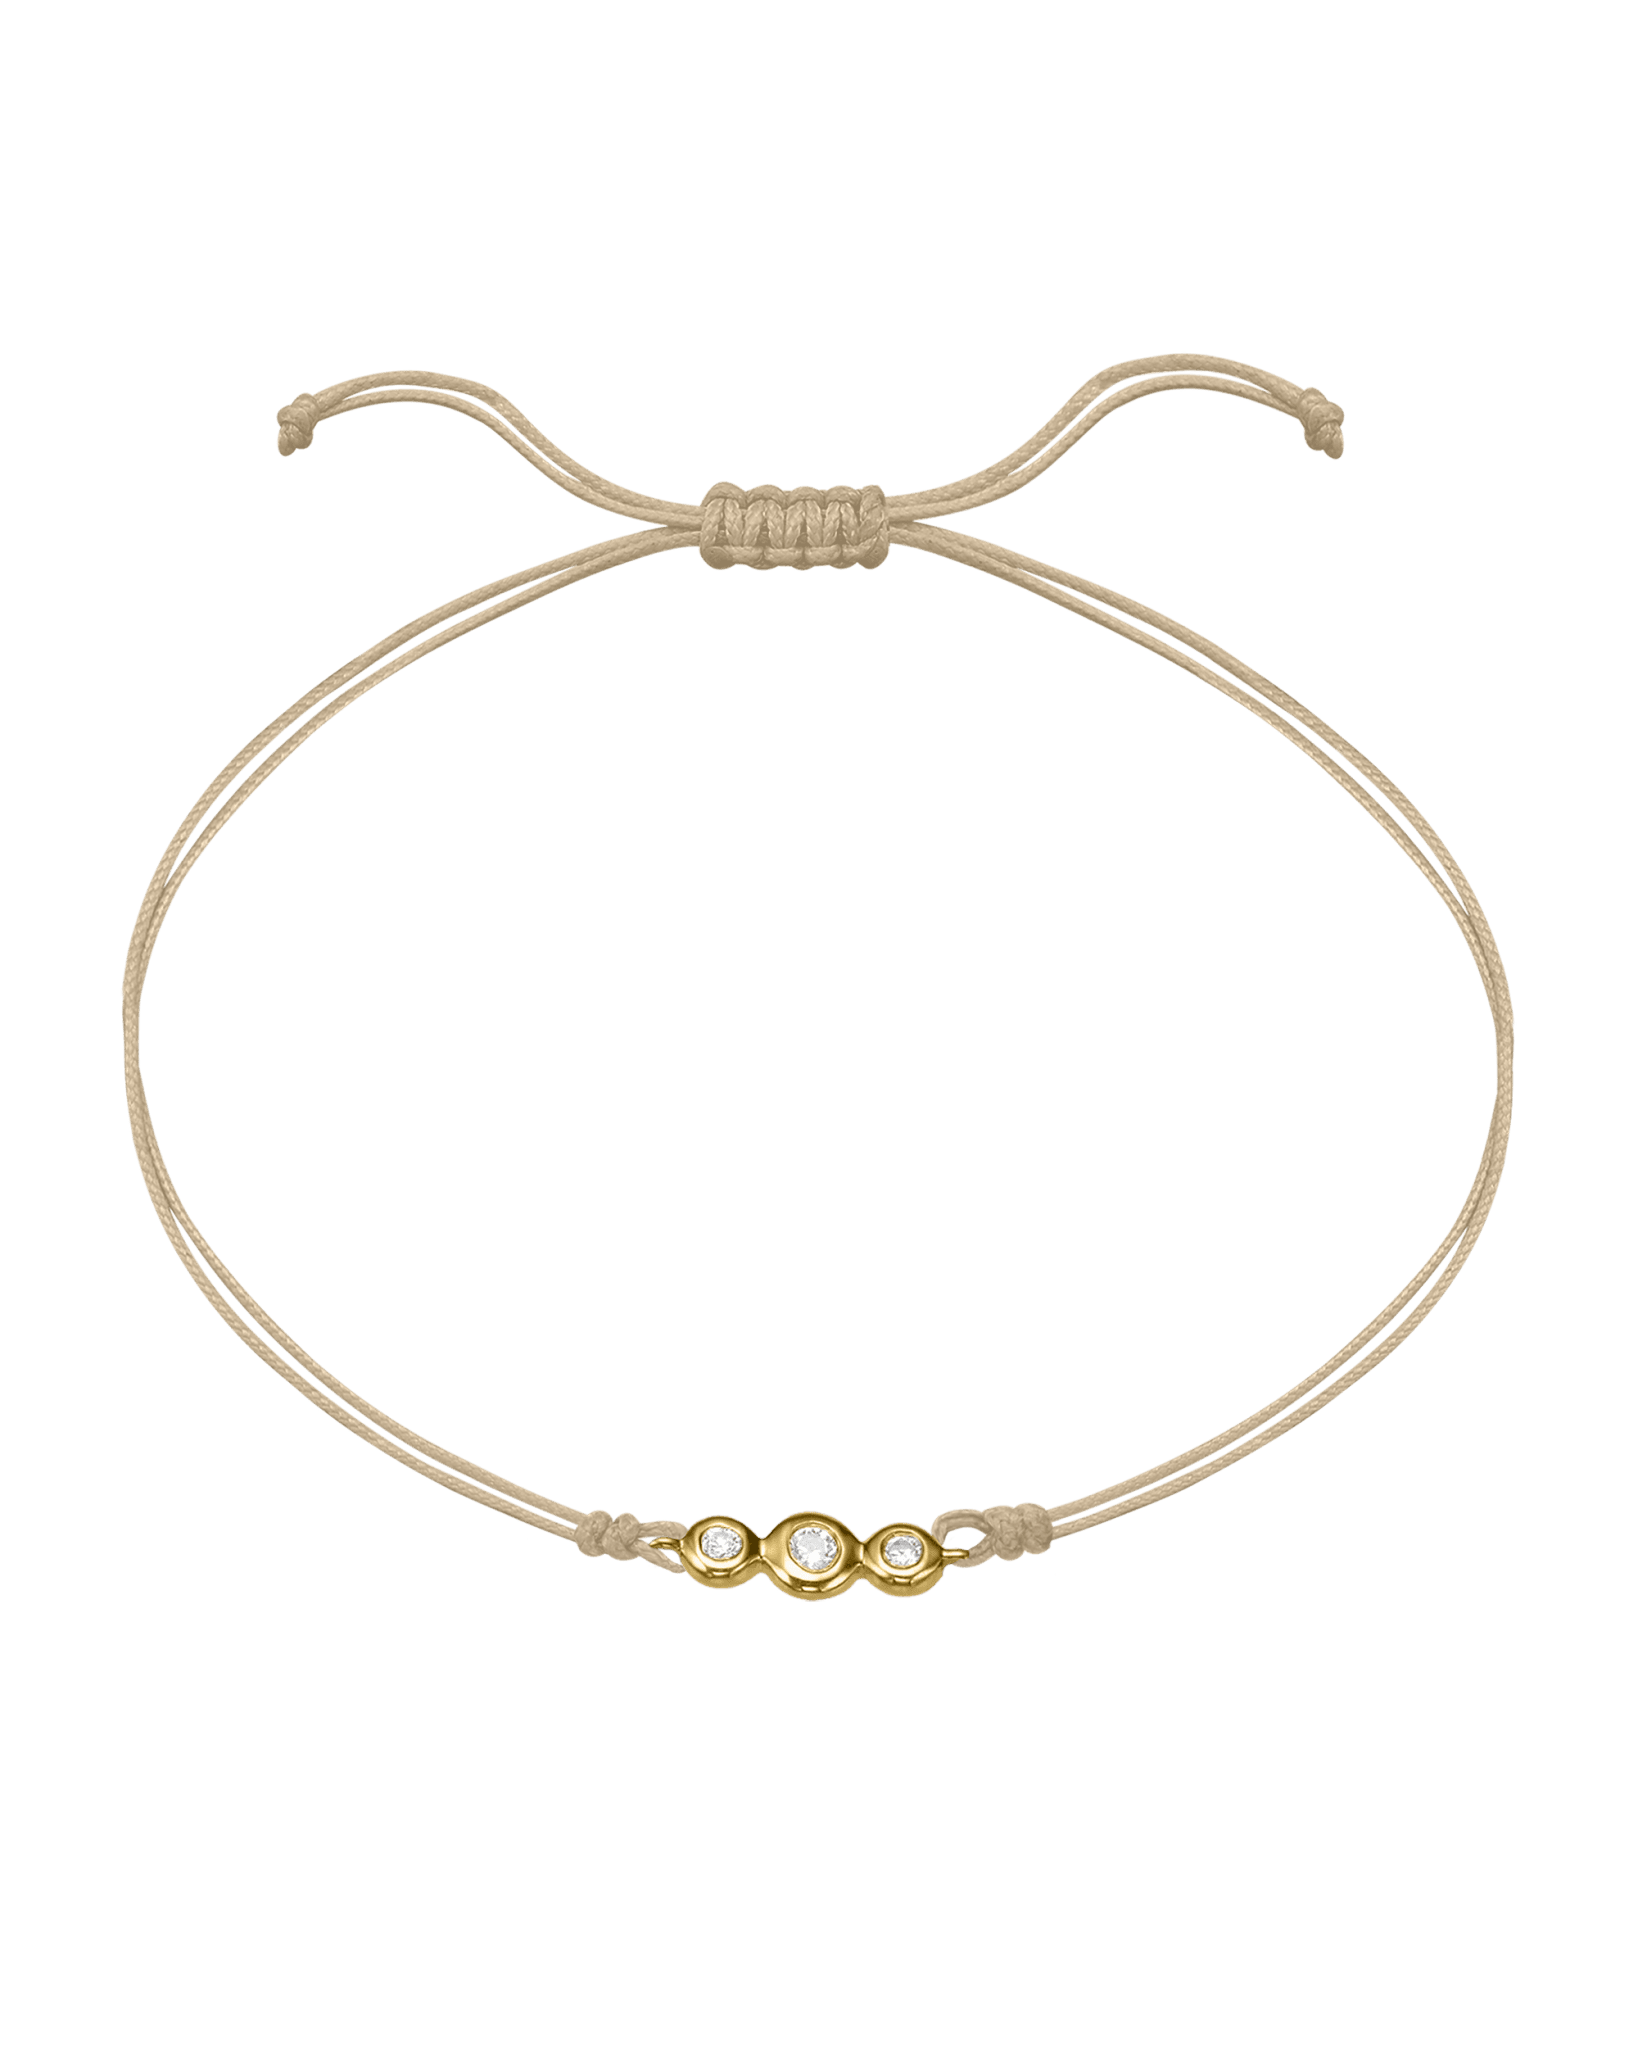 The Three of Us Diamond String of love - 14K Yellow Gold Bracelet 14K Solid Gold Beige 